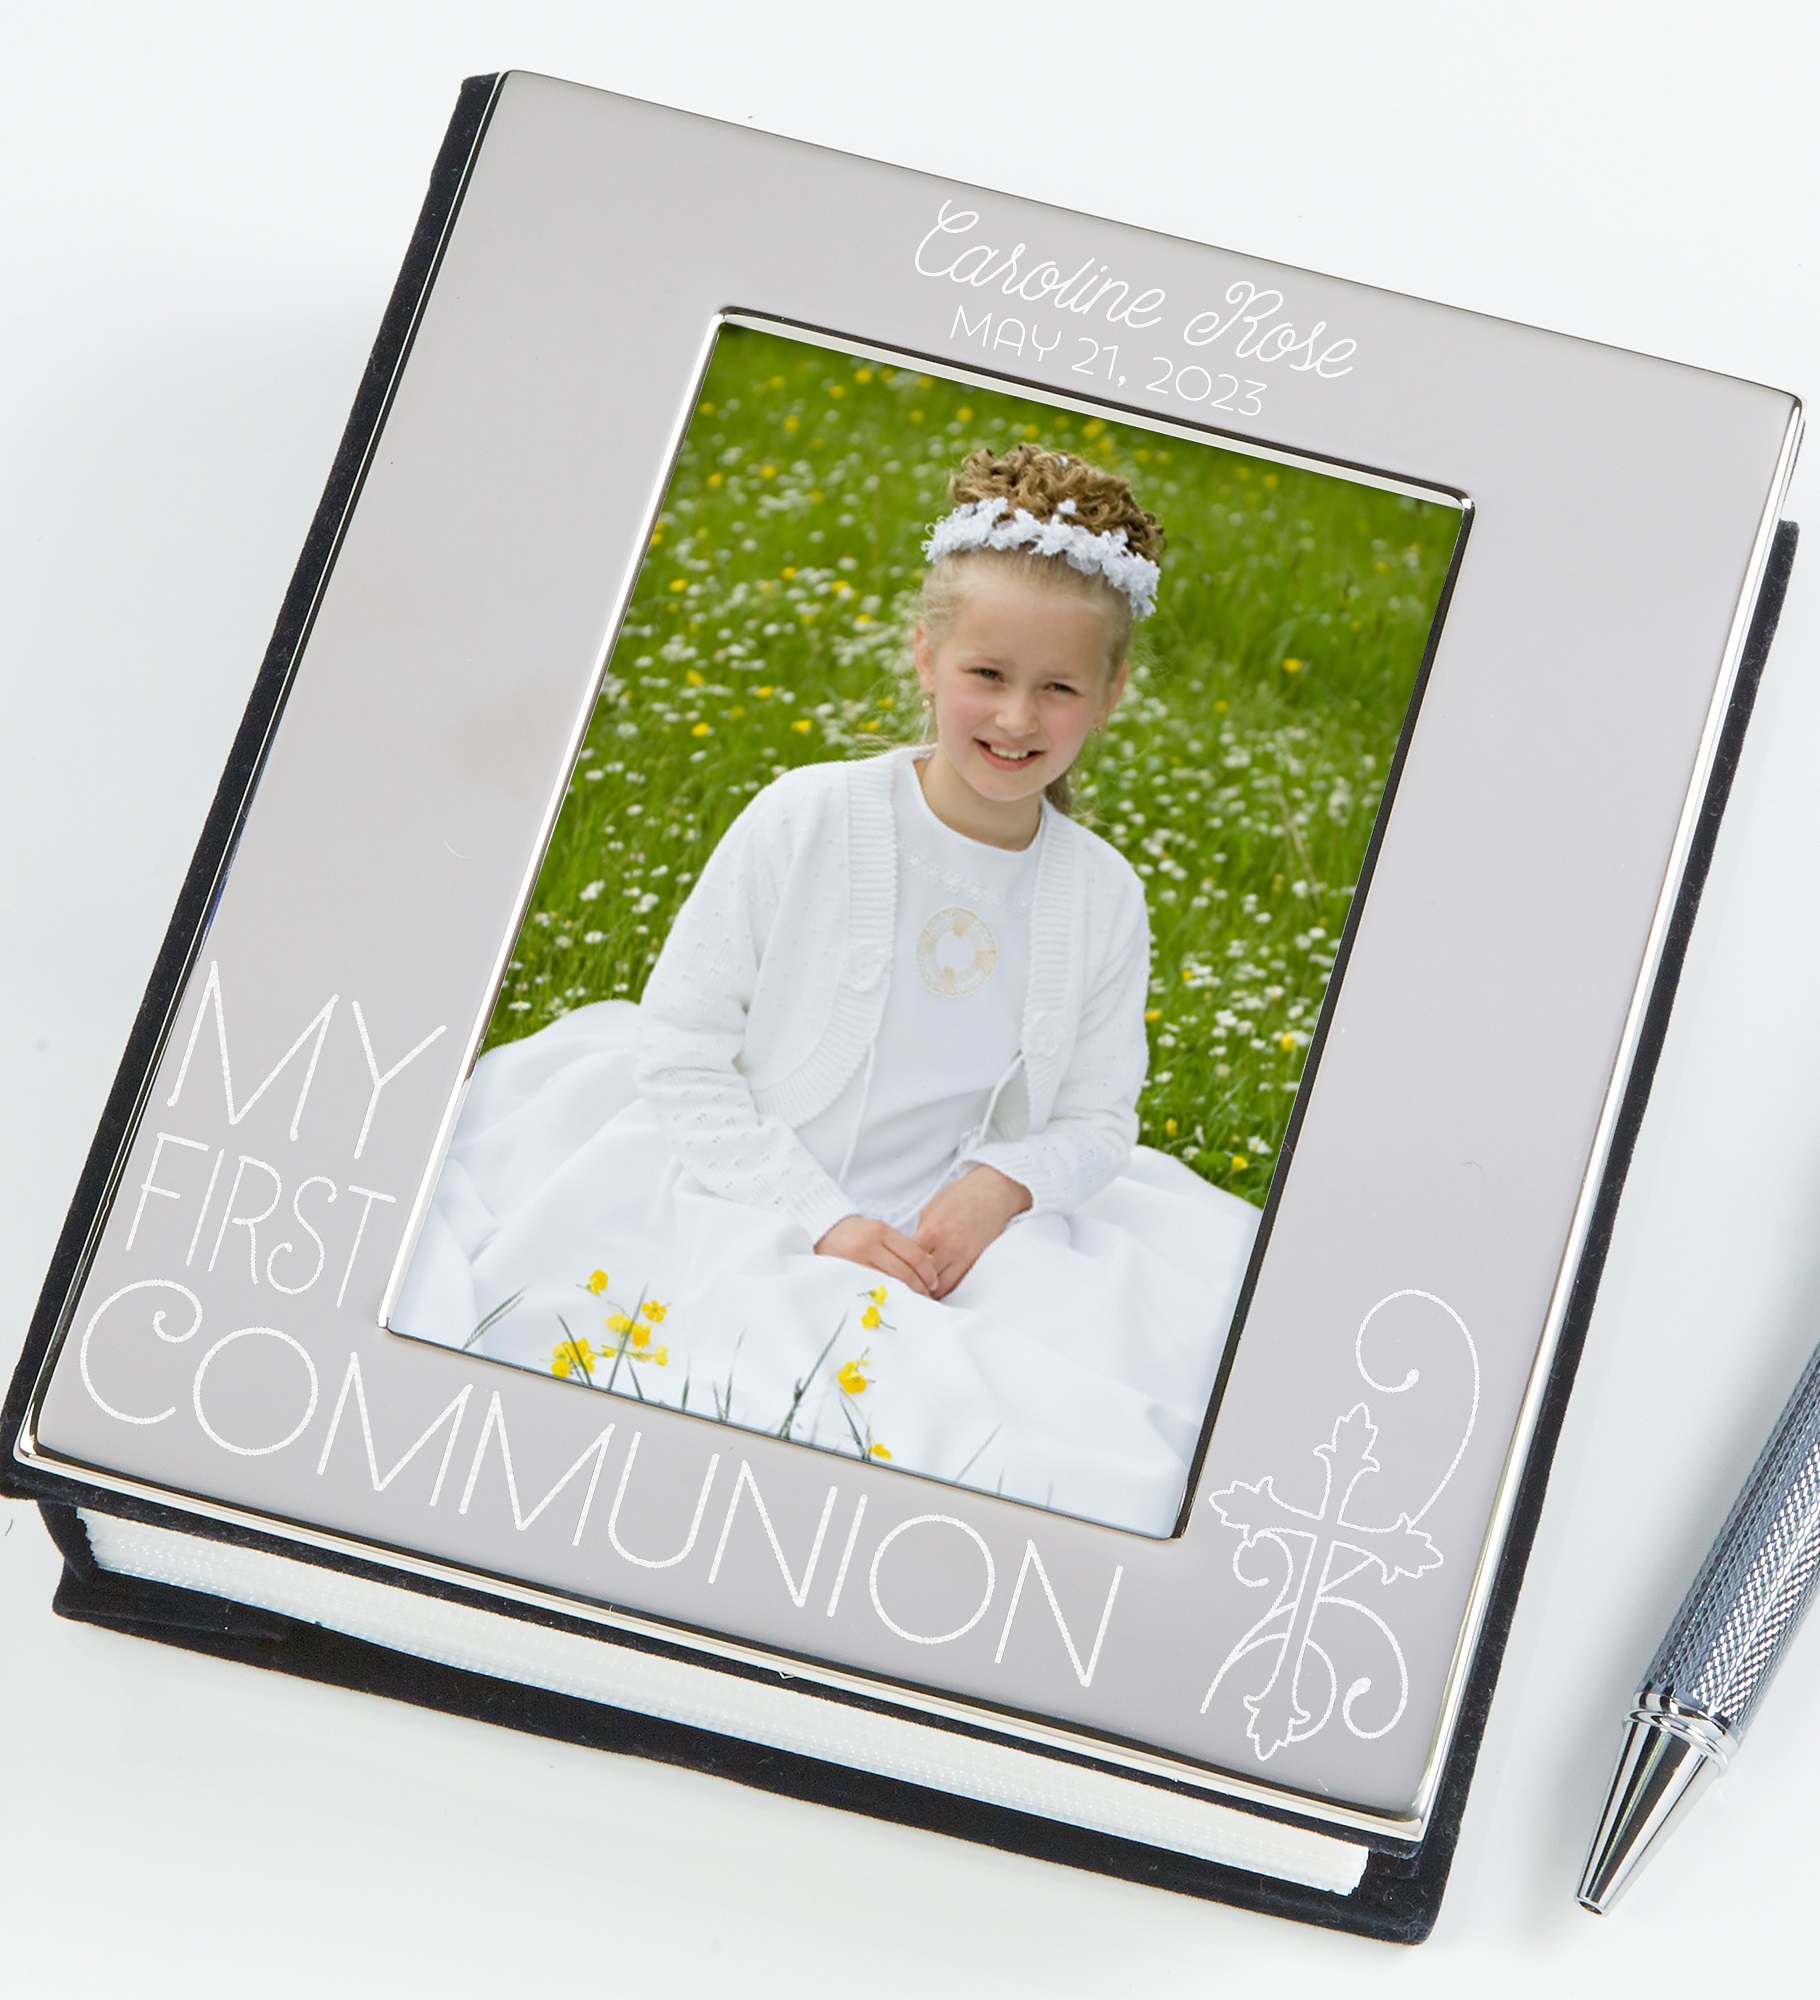 My First Communion Personalized Engraved Photo Album